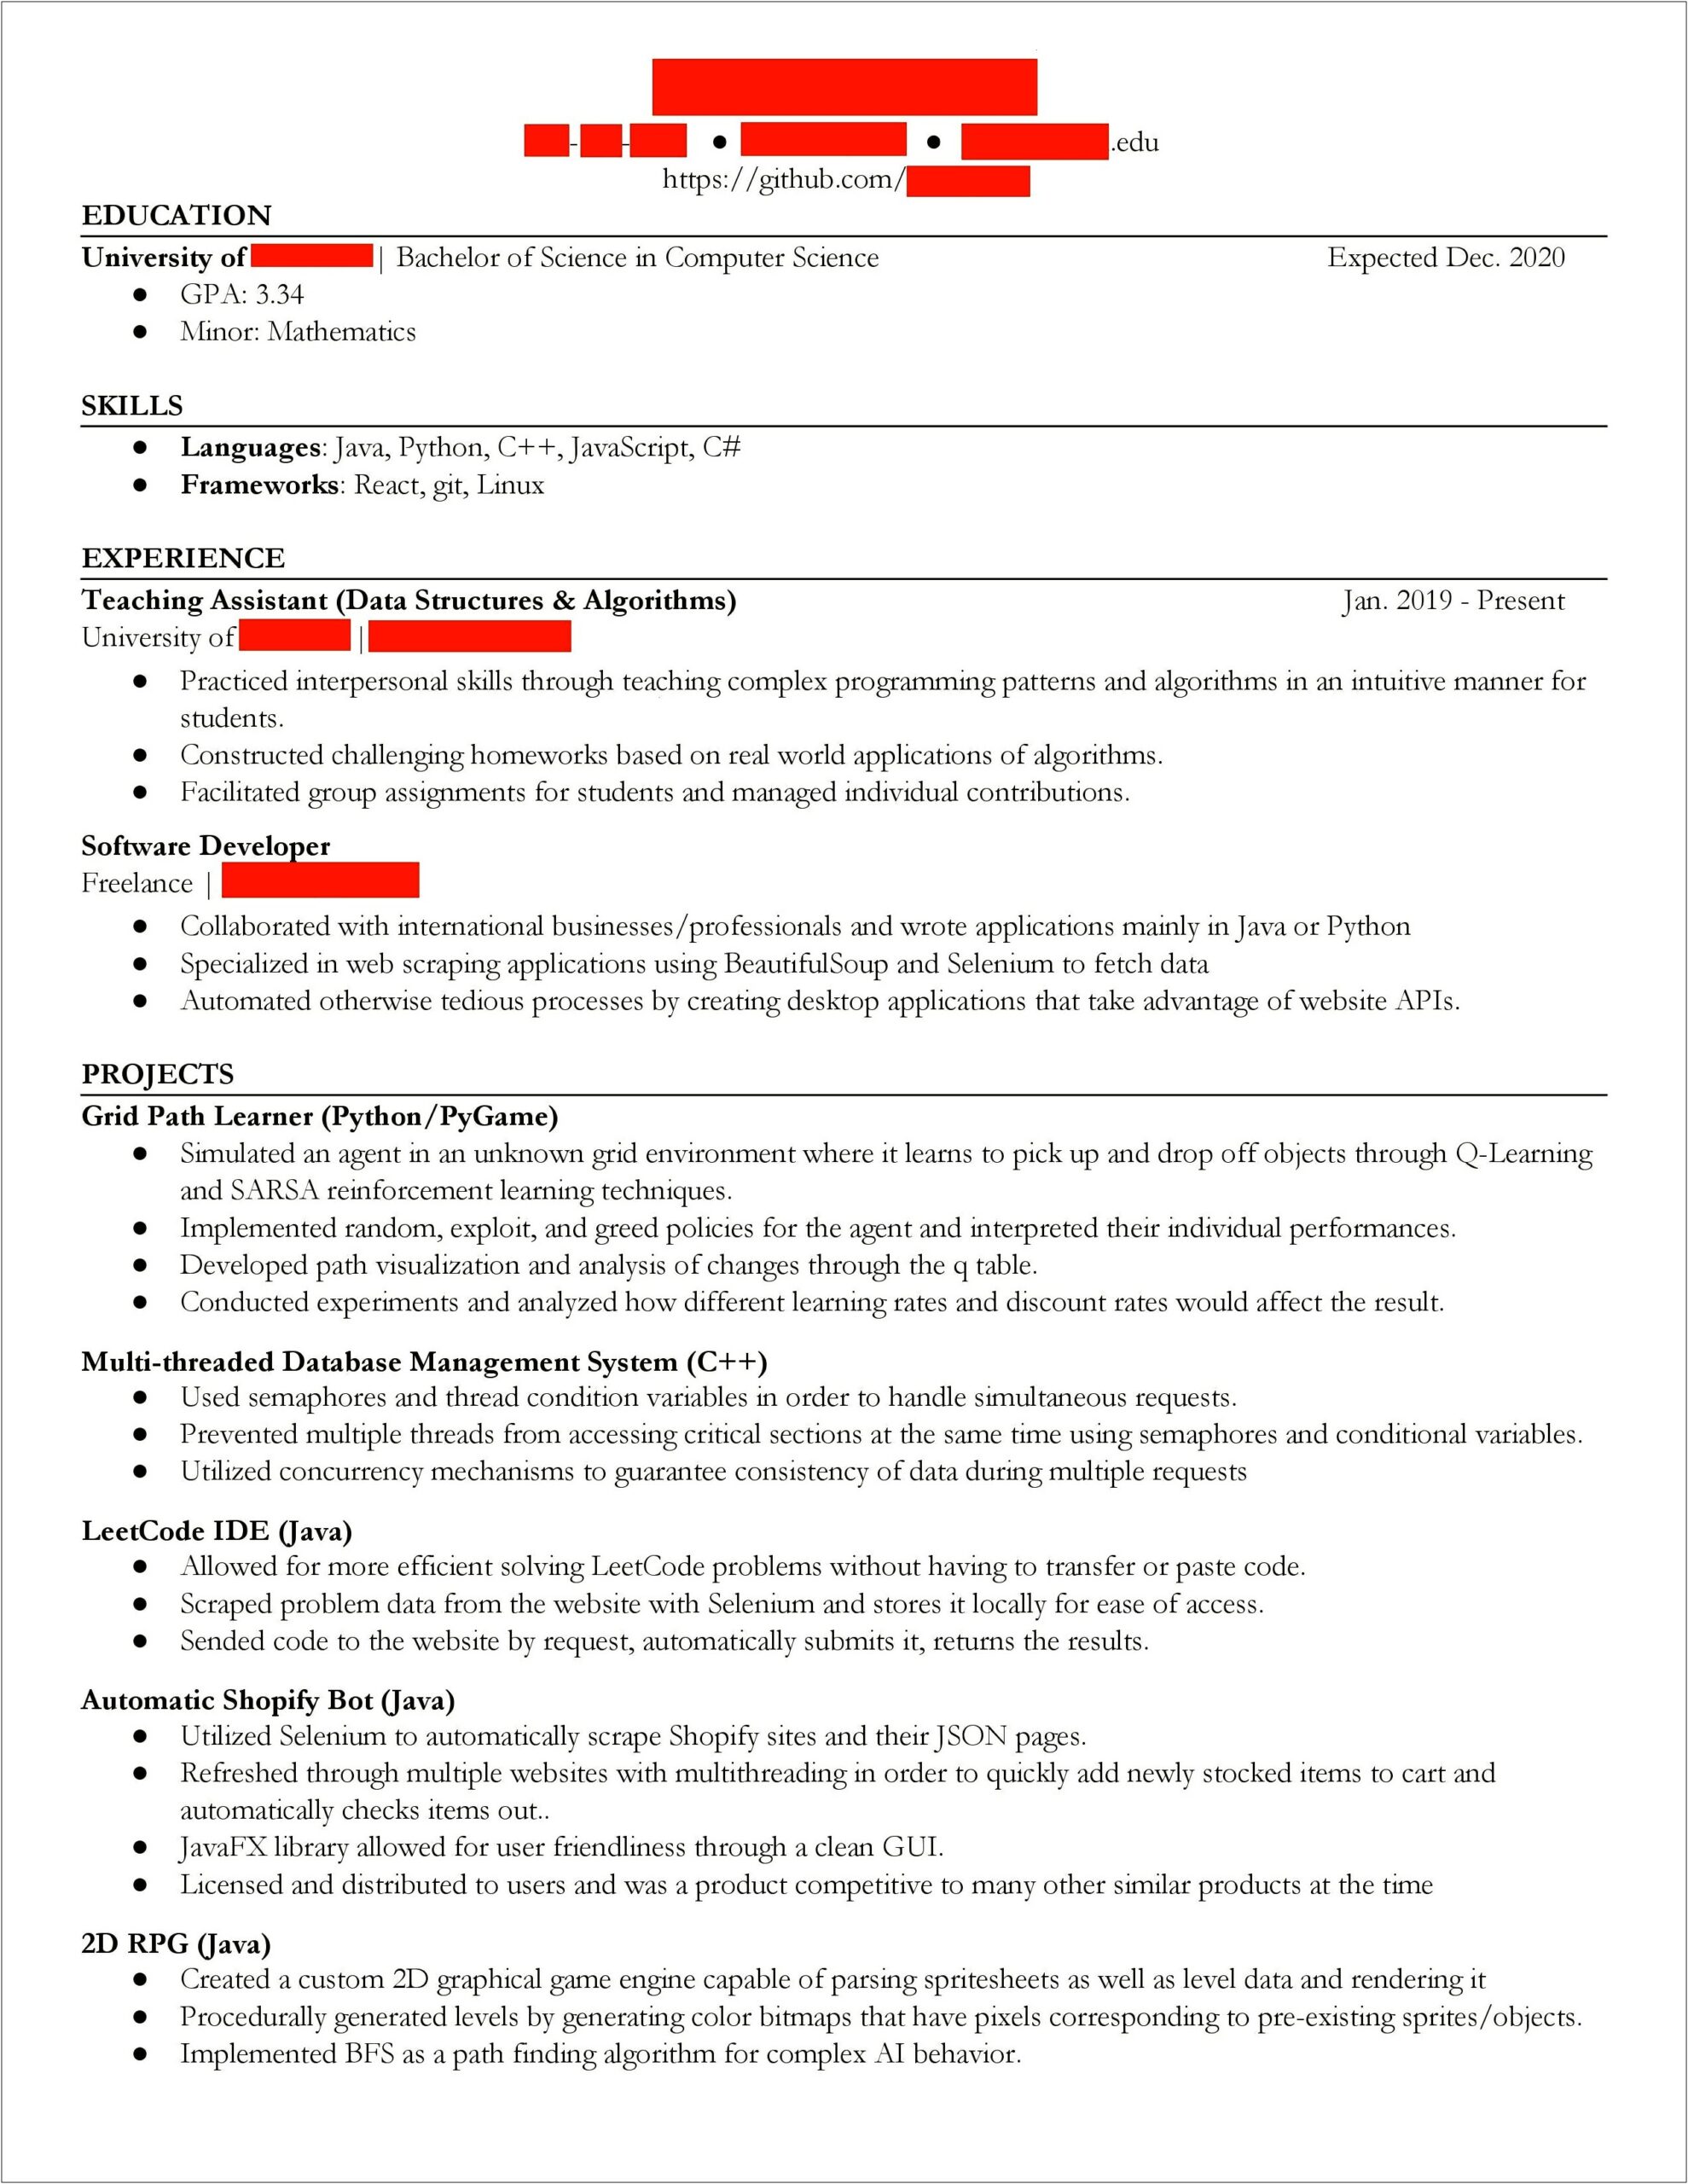 Does A Resume Have To Include Object